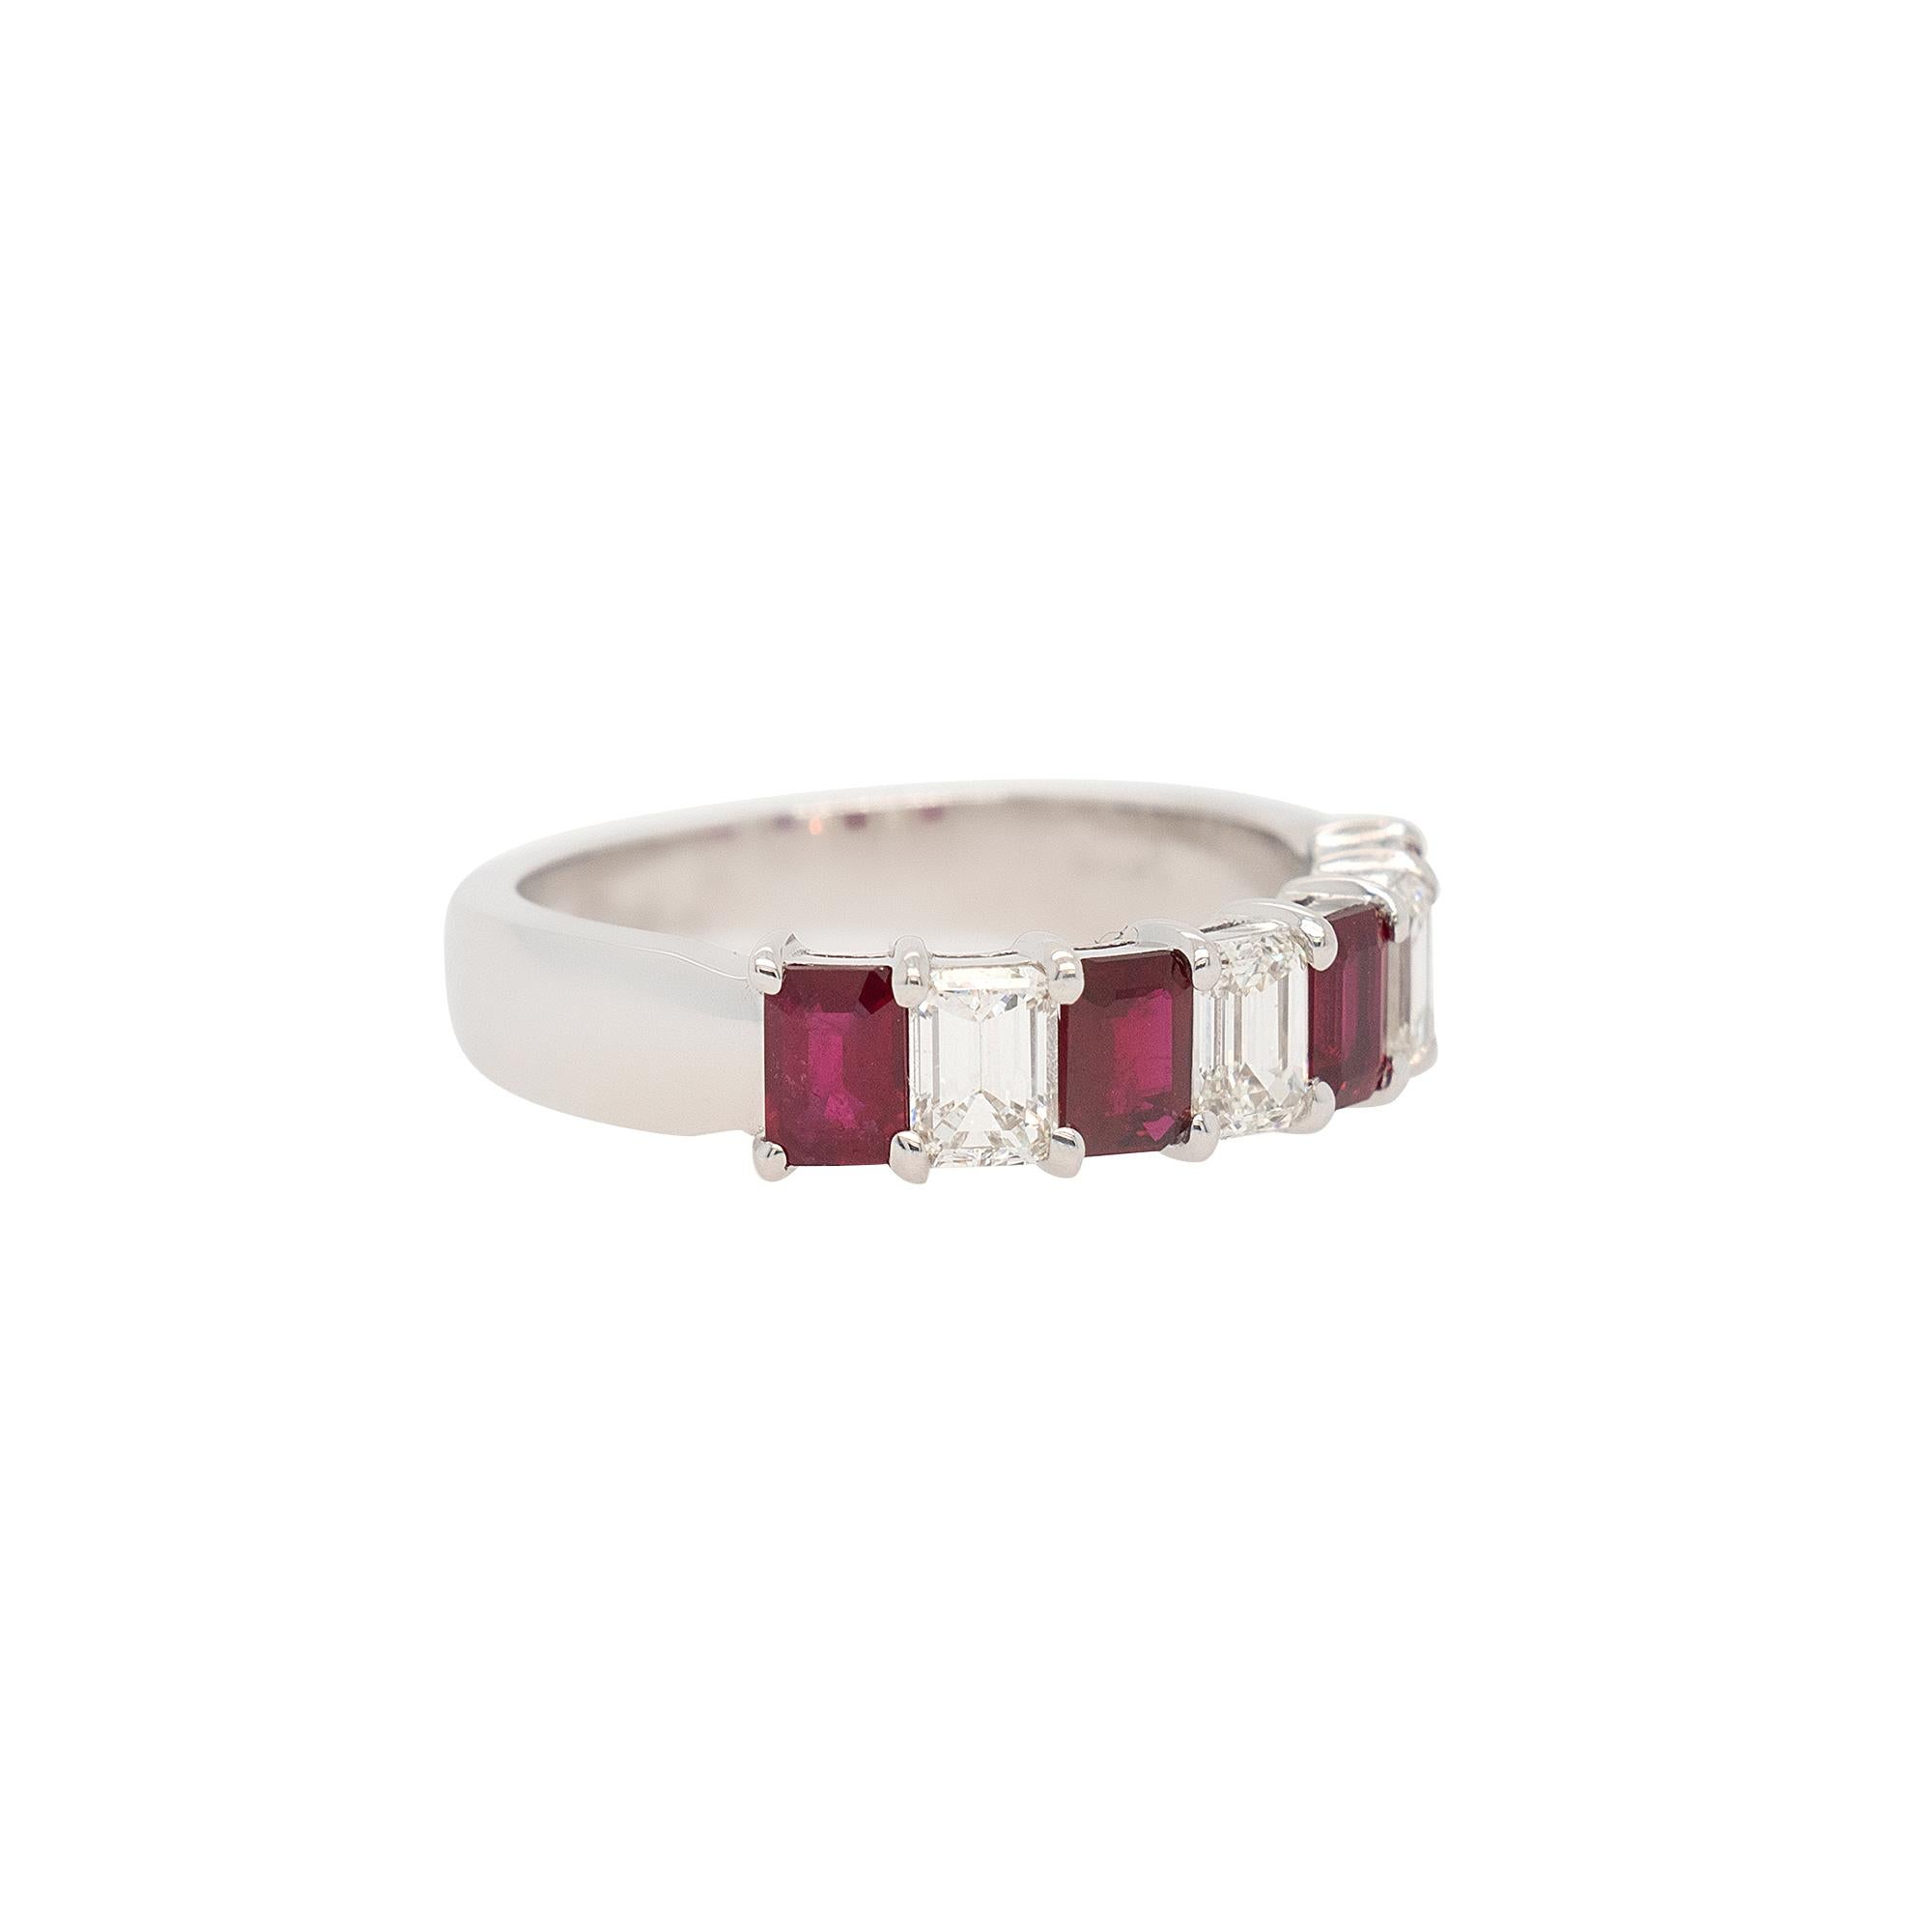 Gemstone Details: 
1.65ct Natural Diamond Emerald and Ruby Total Gem Weight
Ring Details:	
14k White Gold
21.0mm x 3.7mm
Ring Size: 6.5 (can be sized)
Total Weight: 3.7g (2.4dwt)
This item comes with a presentation box!
SKU: A30316657

Embrace the